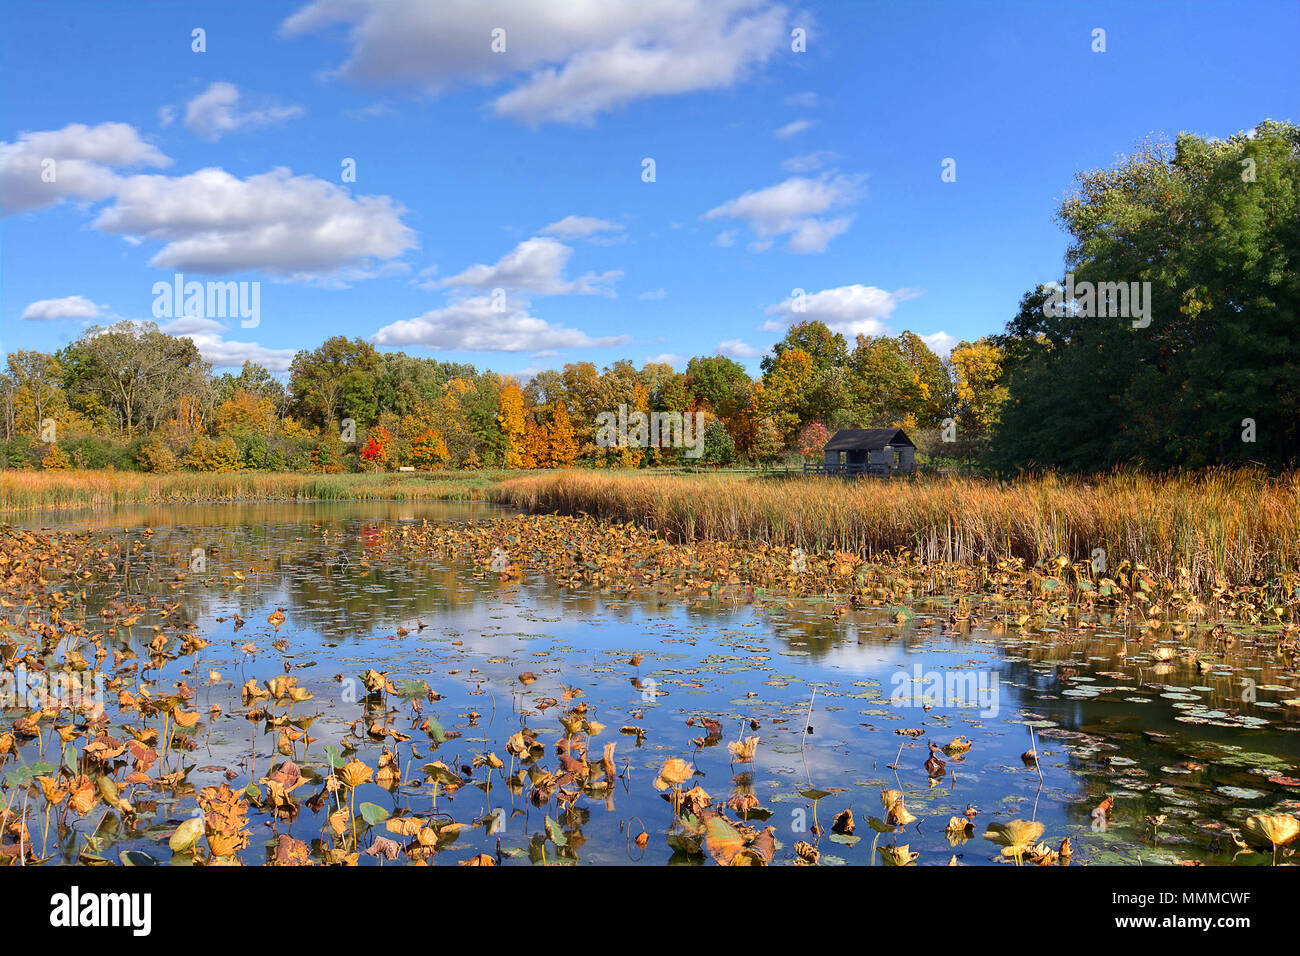 A beautiful autumn scene at a tranquil fishing pond in Ohio. The pond features a rustic shelter house. Located in the W.W. Knight Nature Preserve. Stock Photo